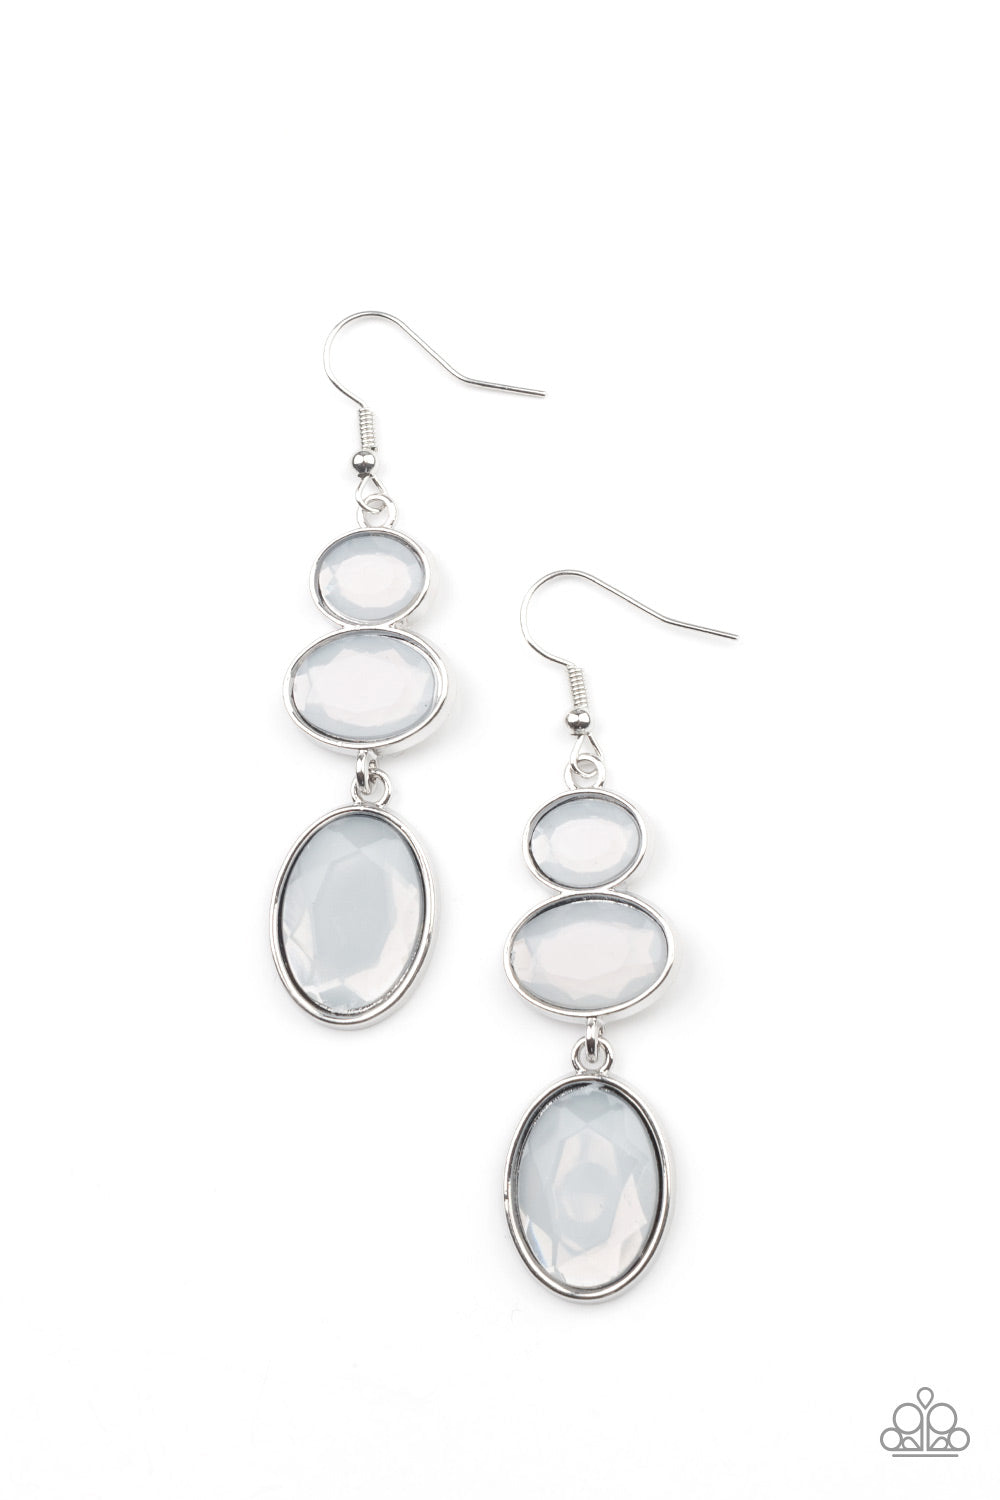 Tiers Of Tranquility - White Earrings - Paparazzi Accessories